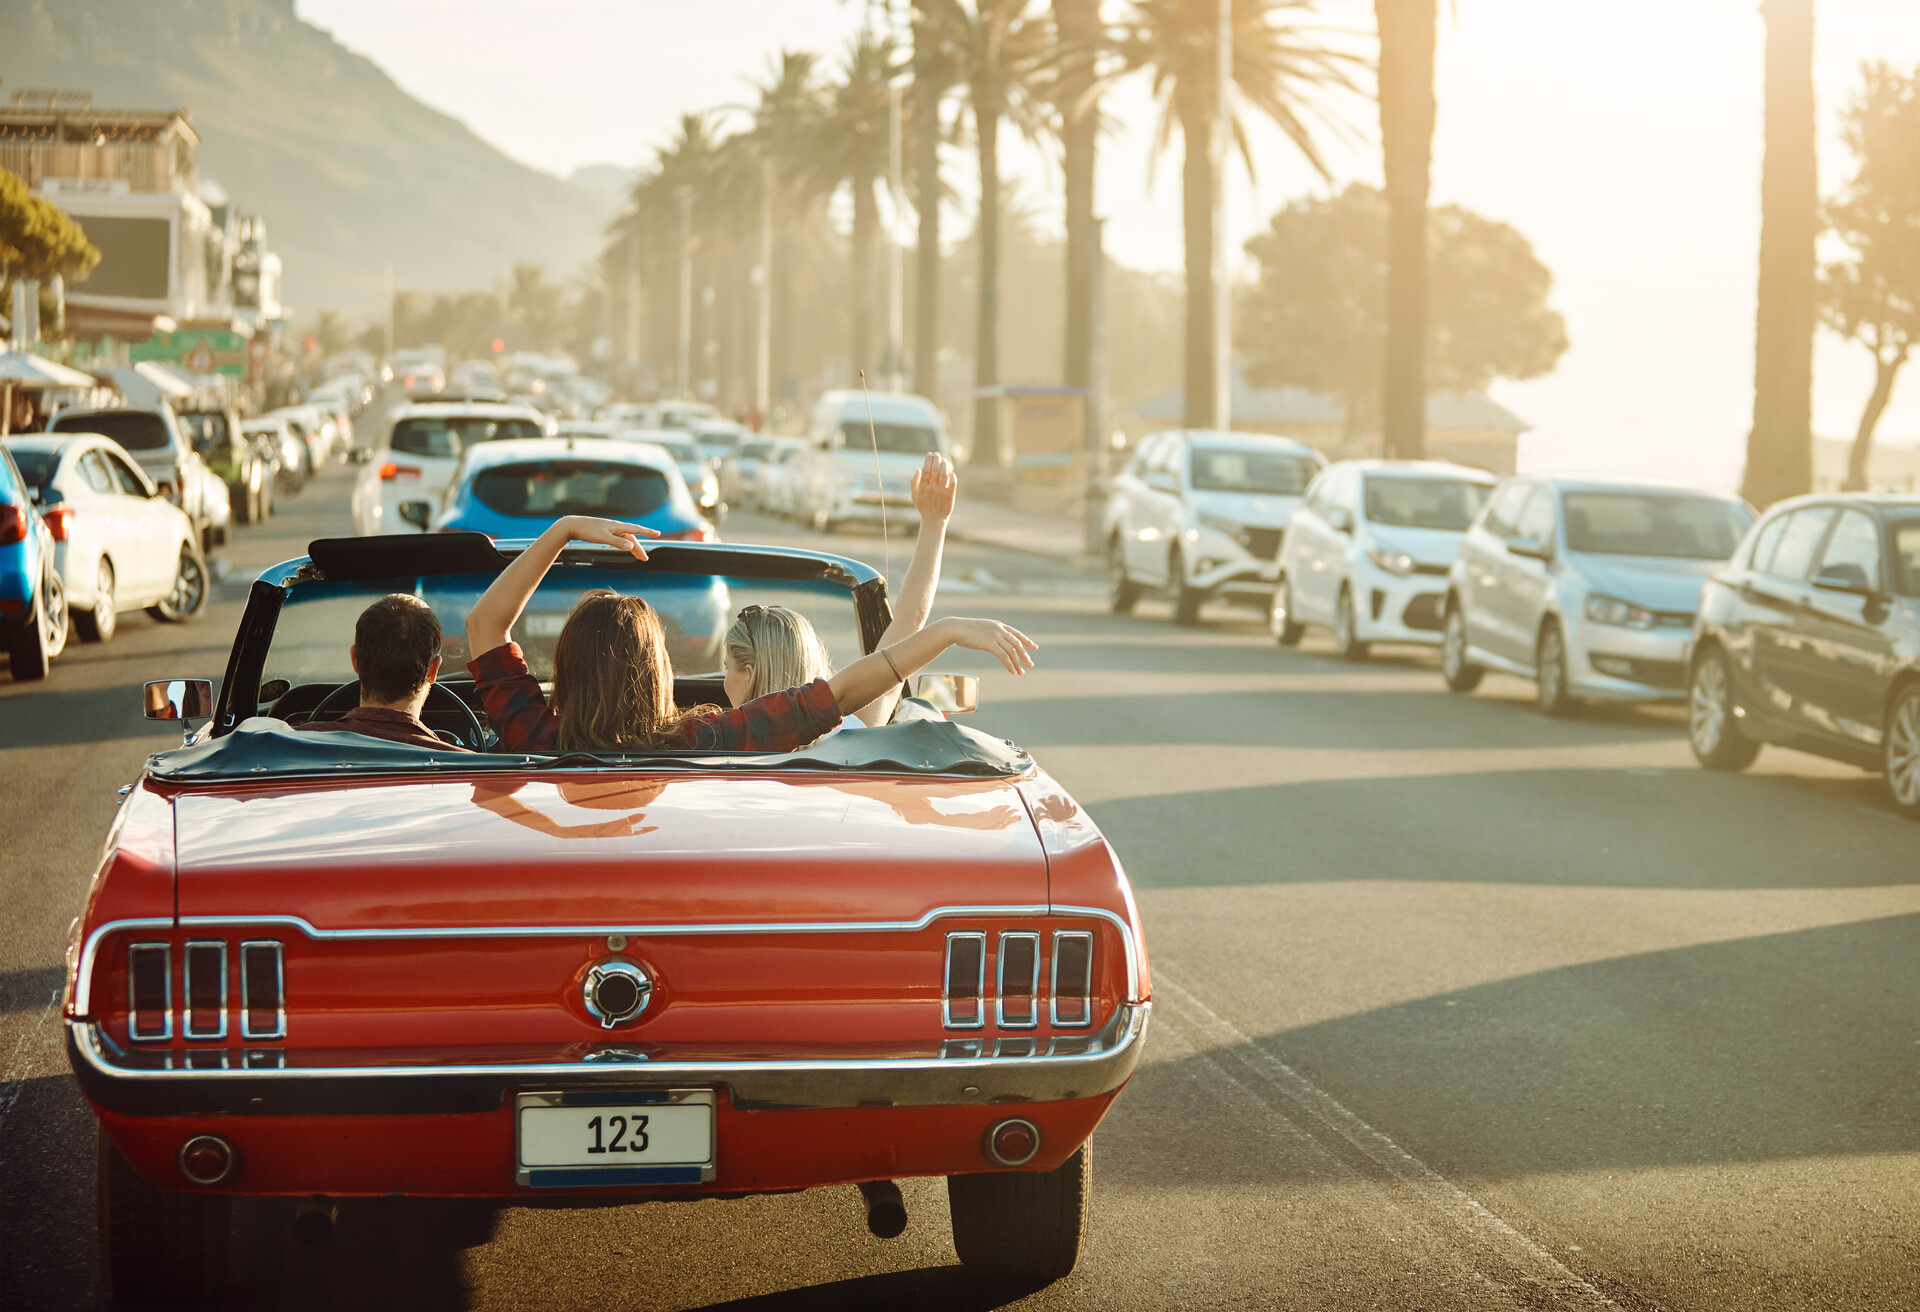 theme_car_vehicle_convertible_sunset_people_vacation-gettyimages